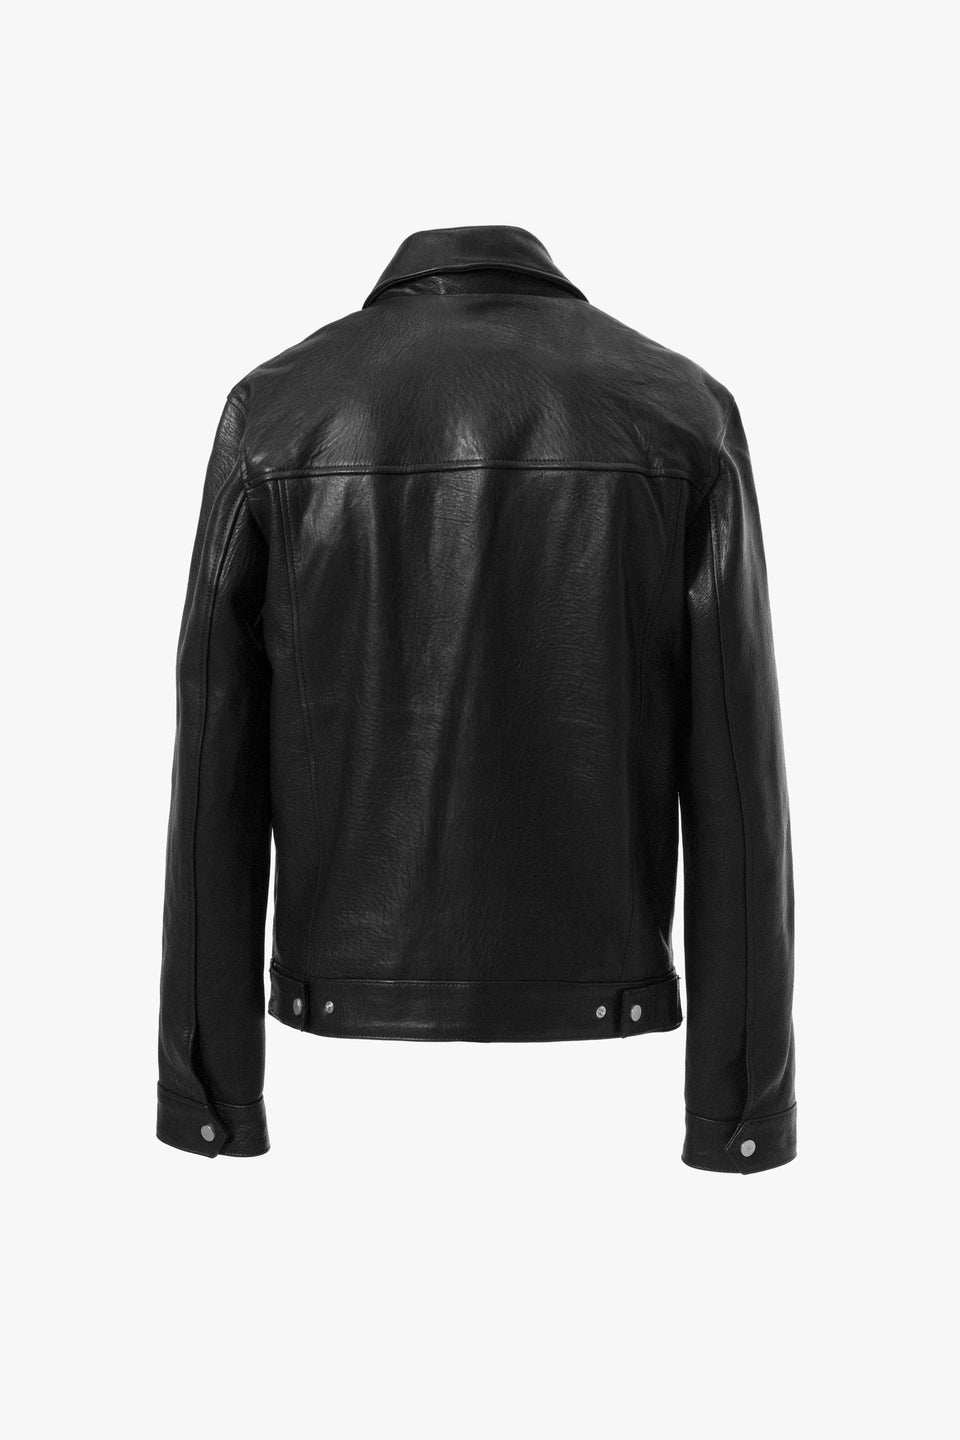 LEATHER TRUCKER JACKET | BLACK LEATHER – OTHER